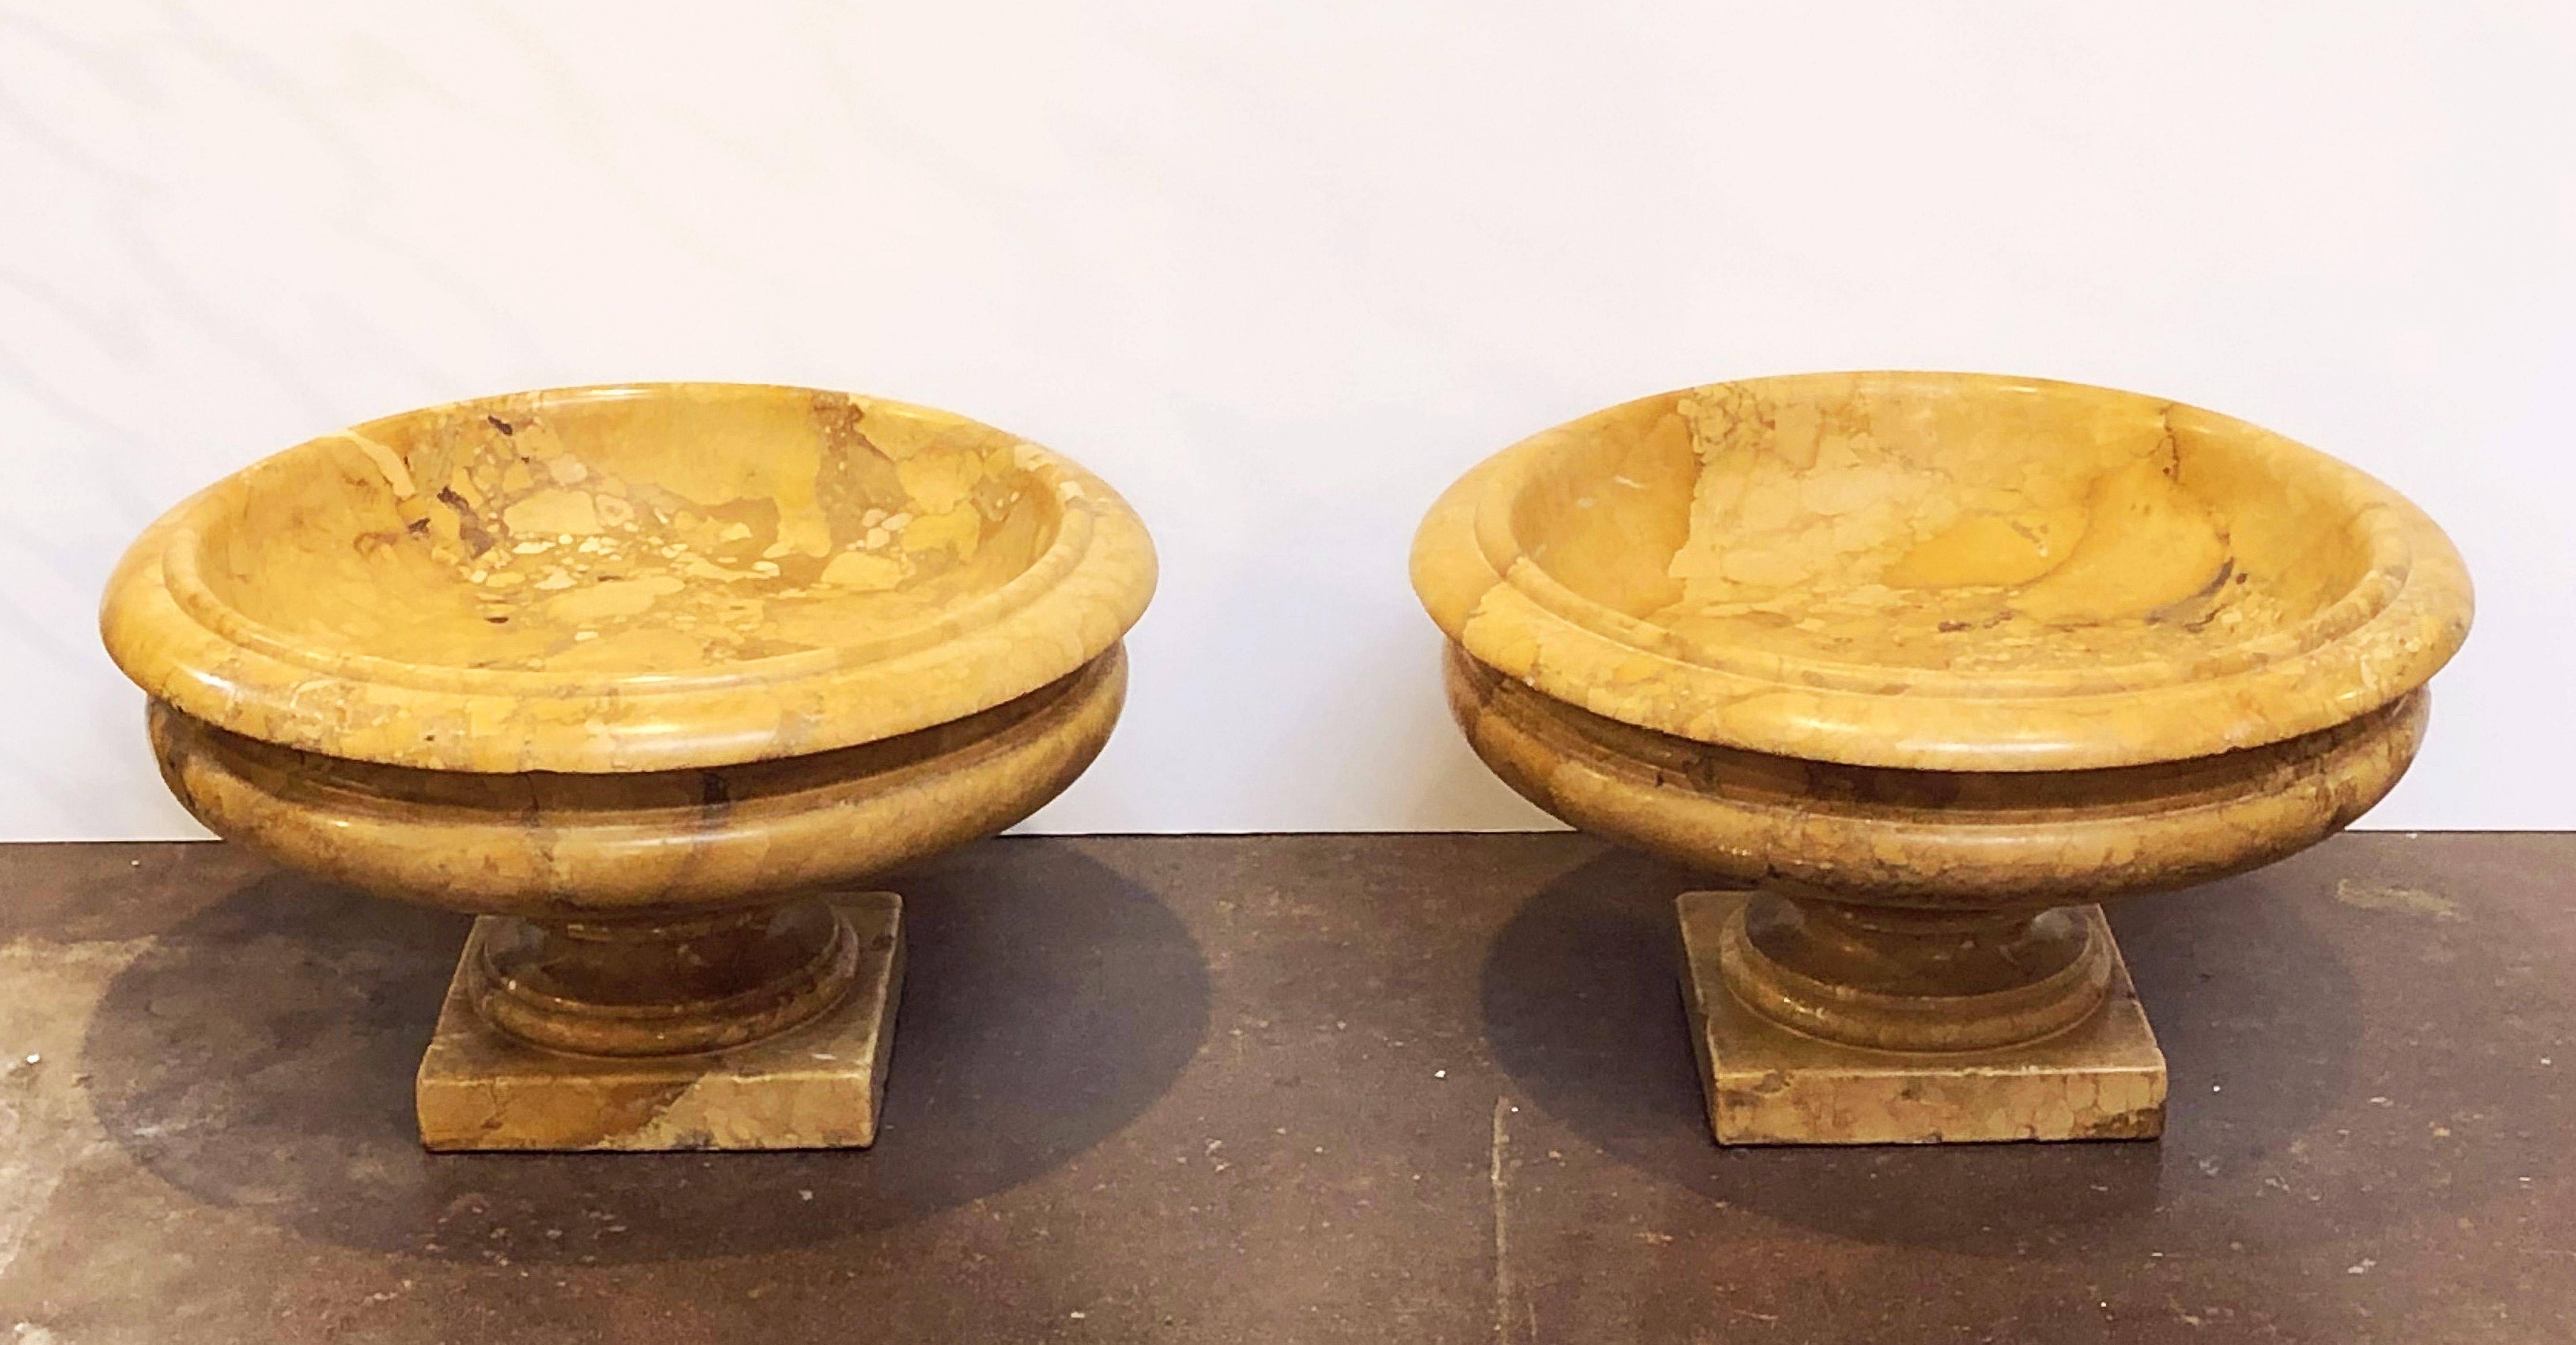 A lovely pair of large Italian urns or planter pots of carved Siena marble in the Neoclassical style, each urn featuring a rolled top edge over a round basin bowl and set upon a footed square plinth base.

A magnificent addition to an indoor or